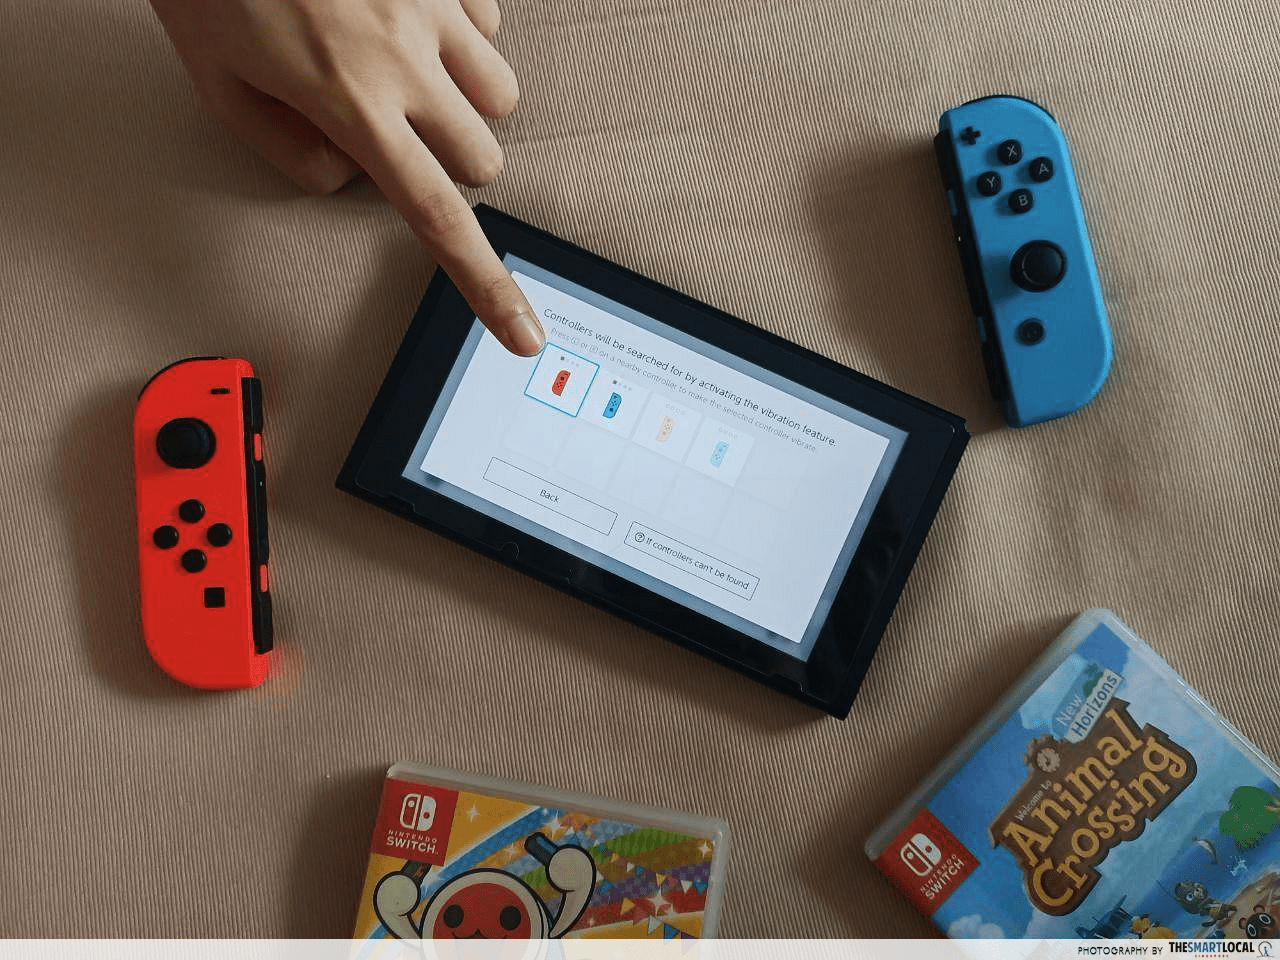 Dar permiso Corrupto licencia 9 Nintendo Switch Hacks To Save Money & Make The Most Out Of Your Device